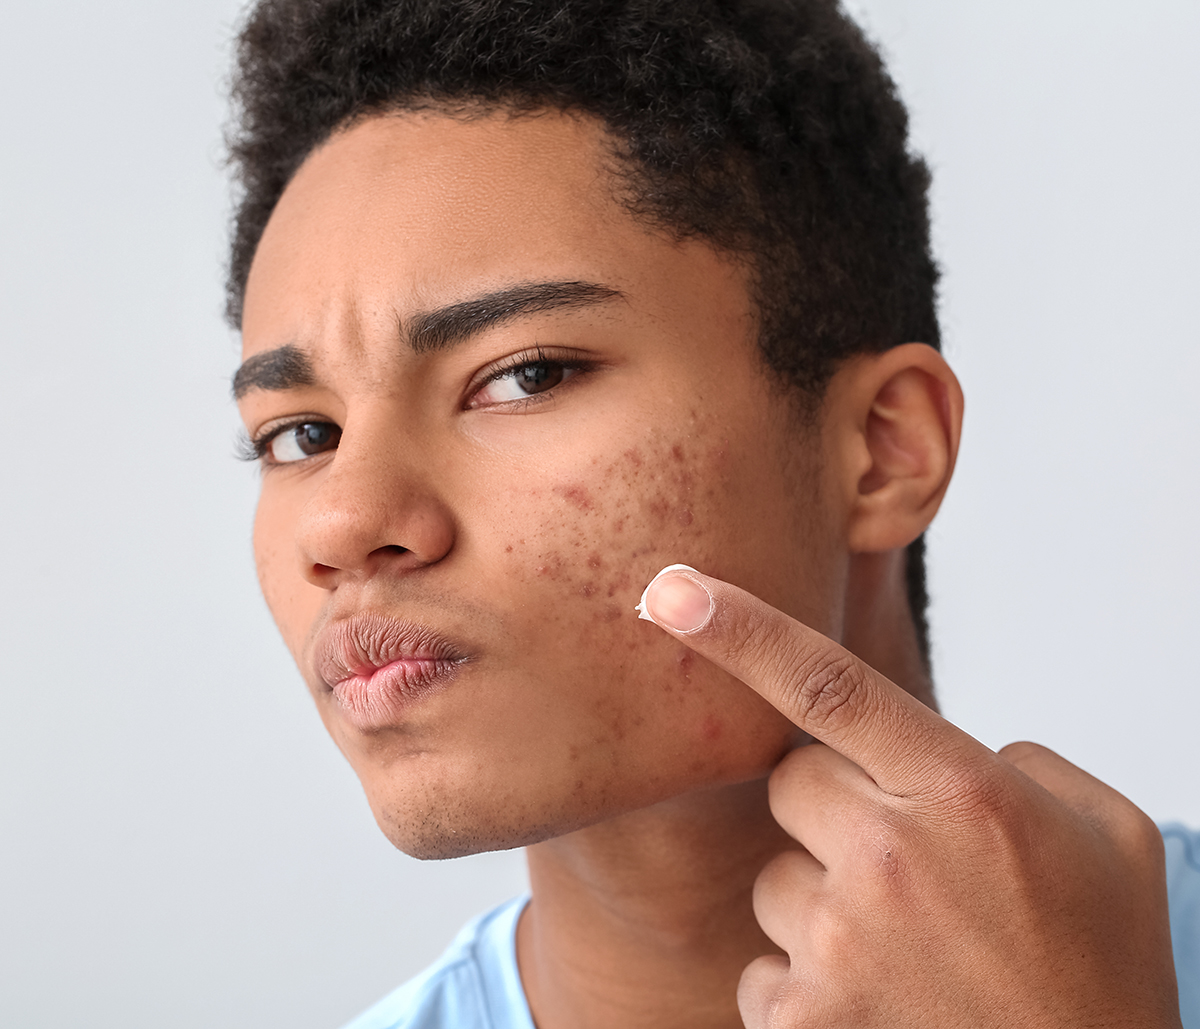 Treatment options for acne scars